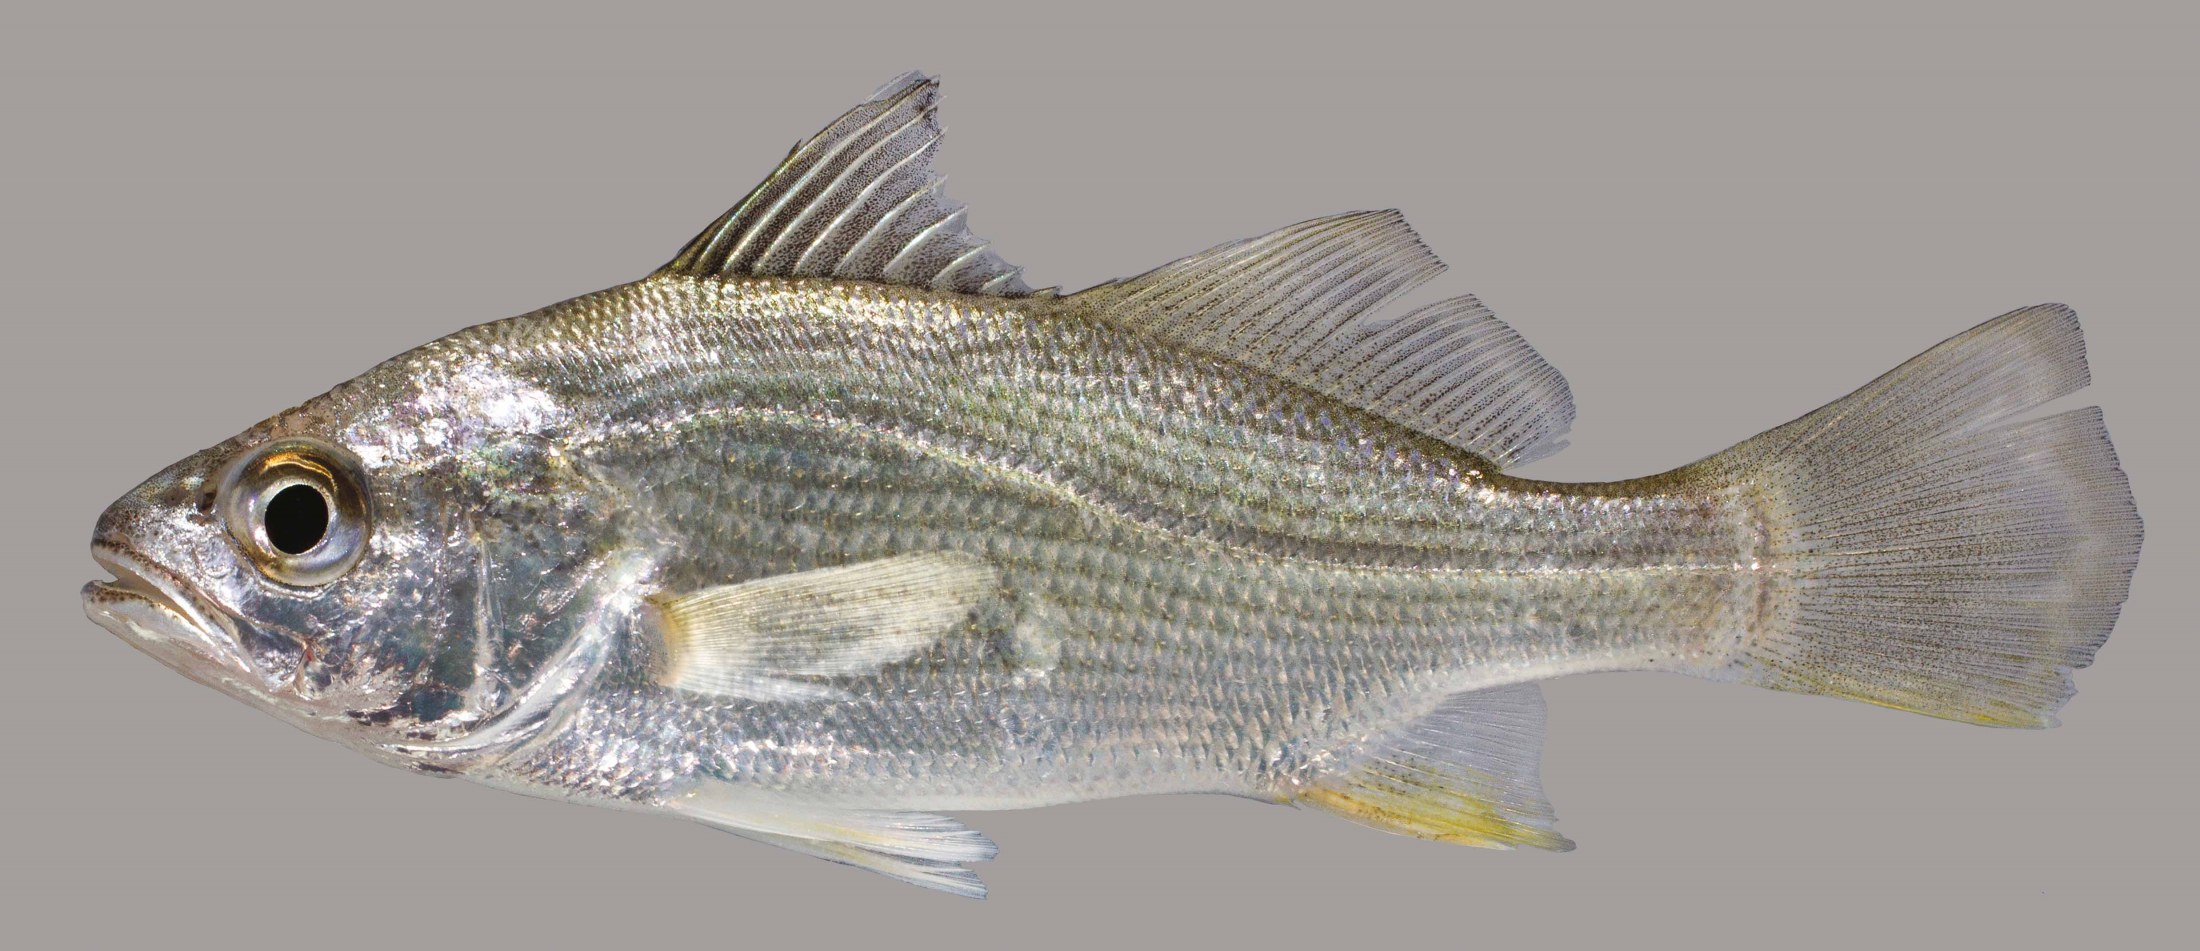 Silver Perch – Discover Fishes